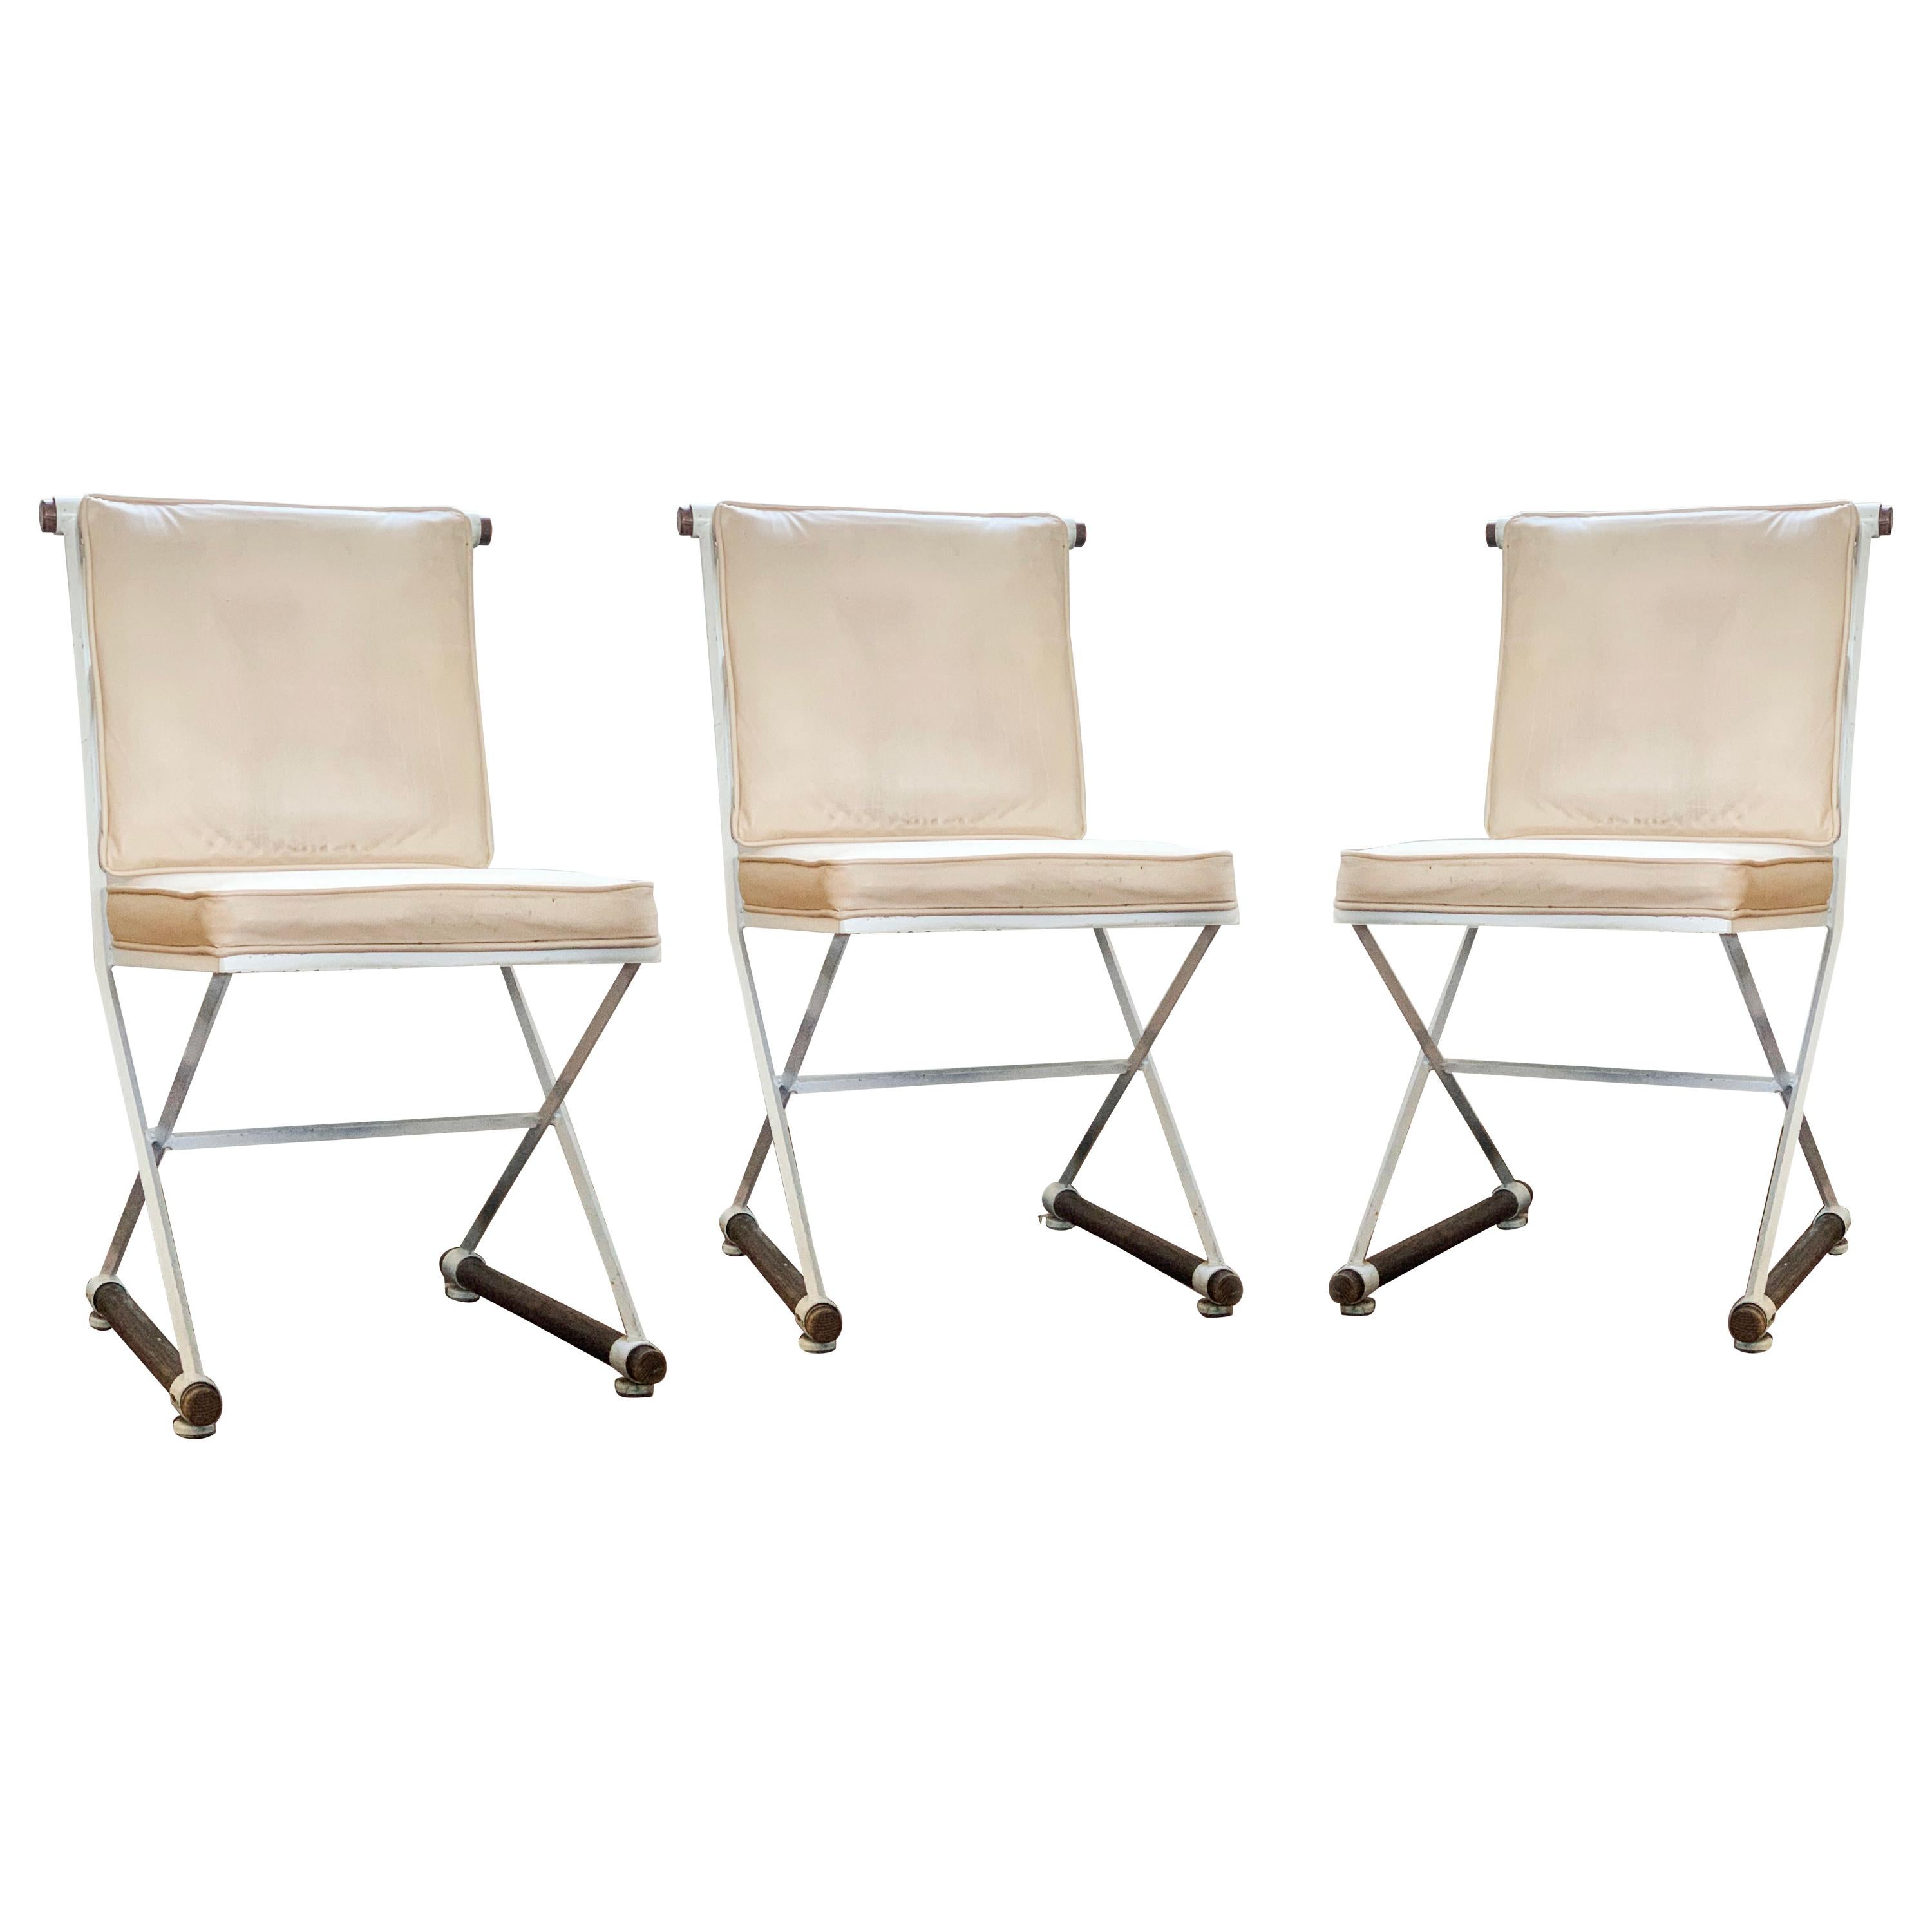 Wrought iron and oak Cleo Baldon white terra dining chair, midcentury, California, 1960s. Original leather (or leather-like) peachy cushions. White finish appears to be original and remains in good condition considering age. Priced per chair, 3